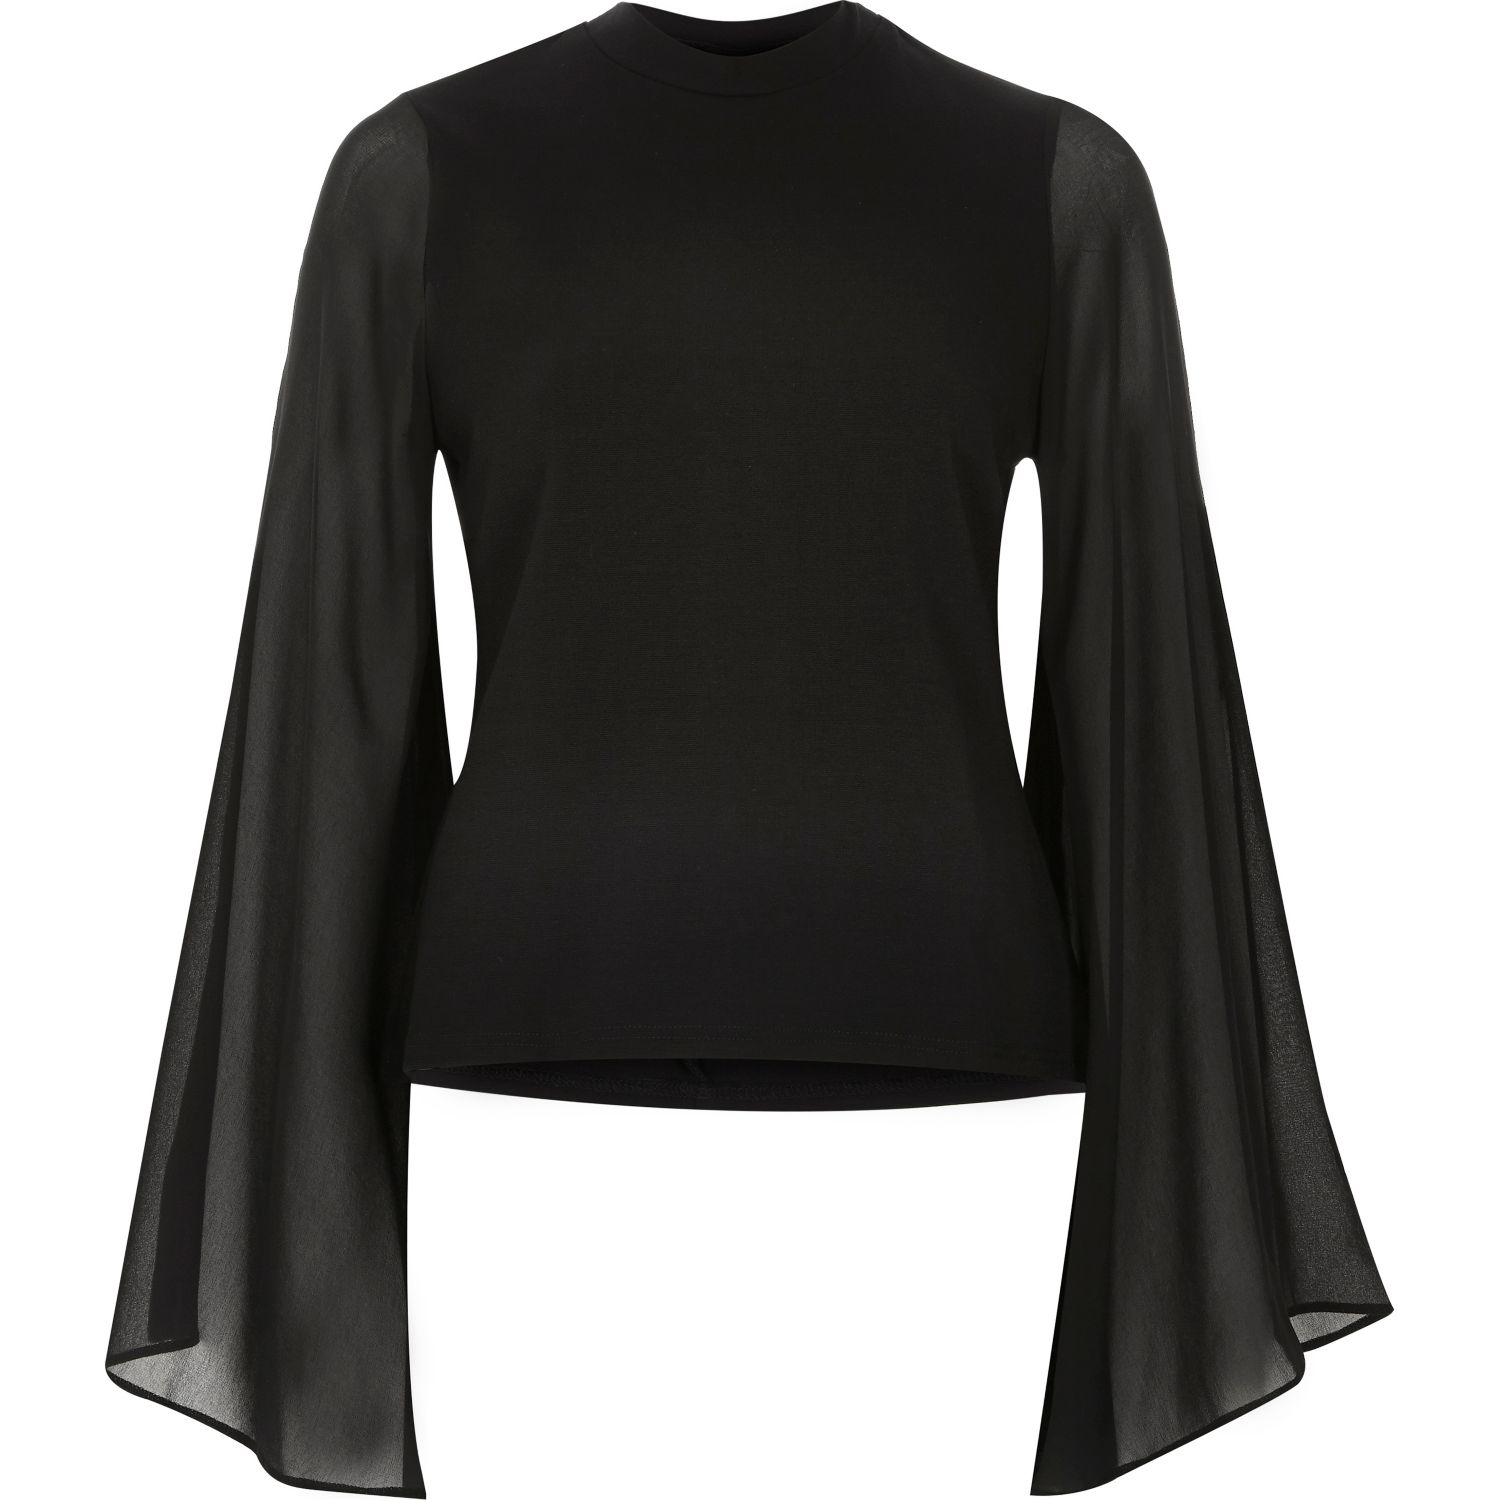 River Island Black Flared Sleeve Cut-out Back Top in Black - Lyst